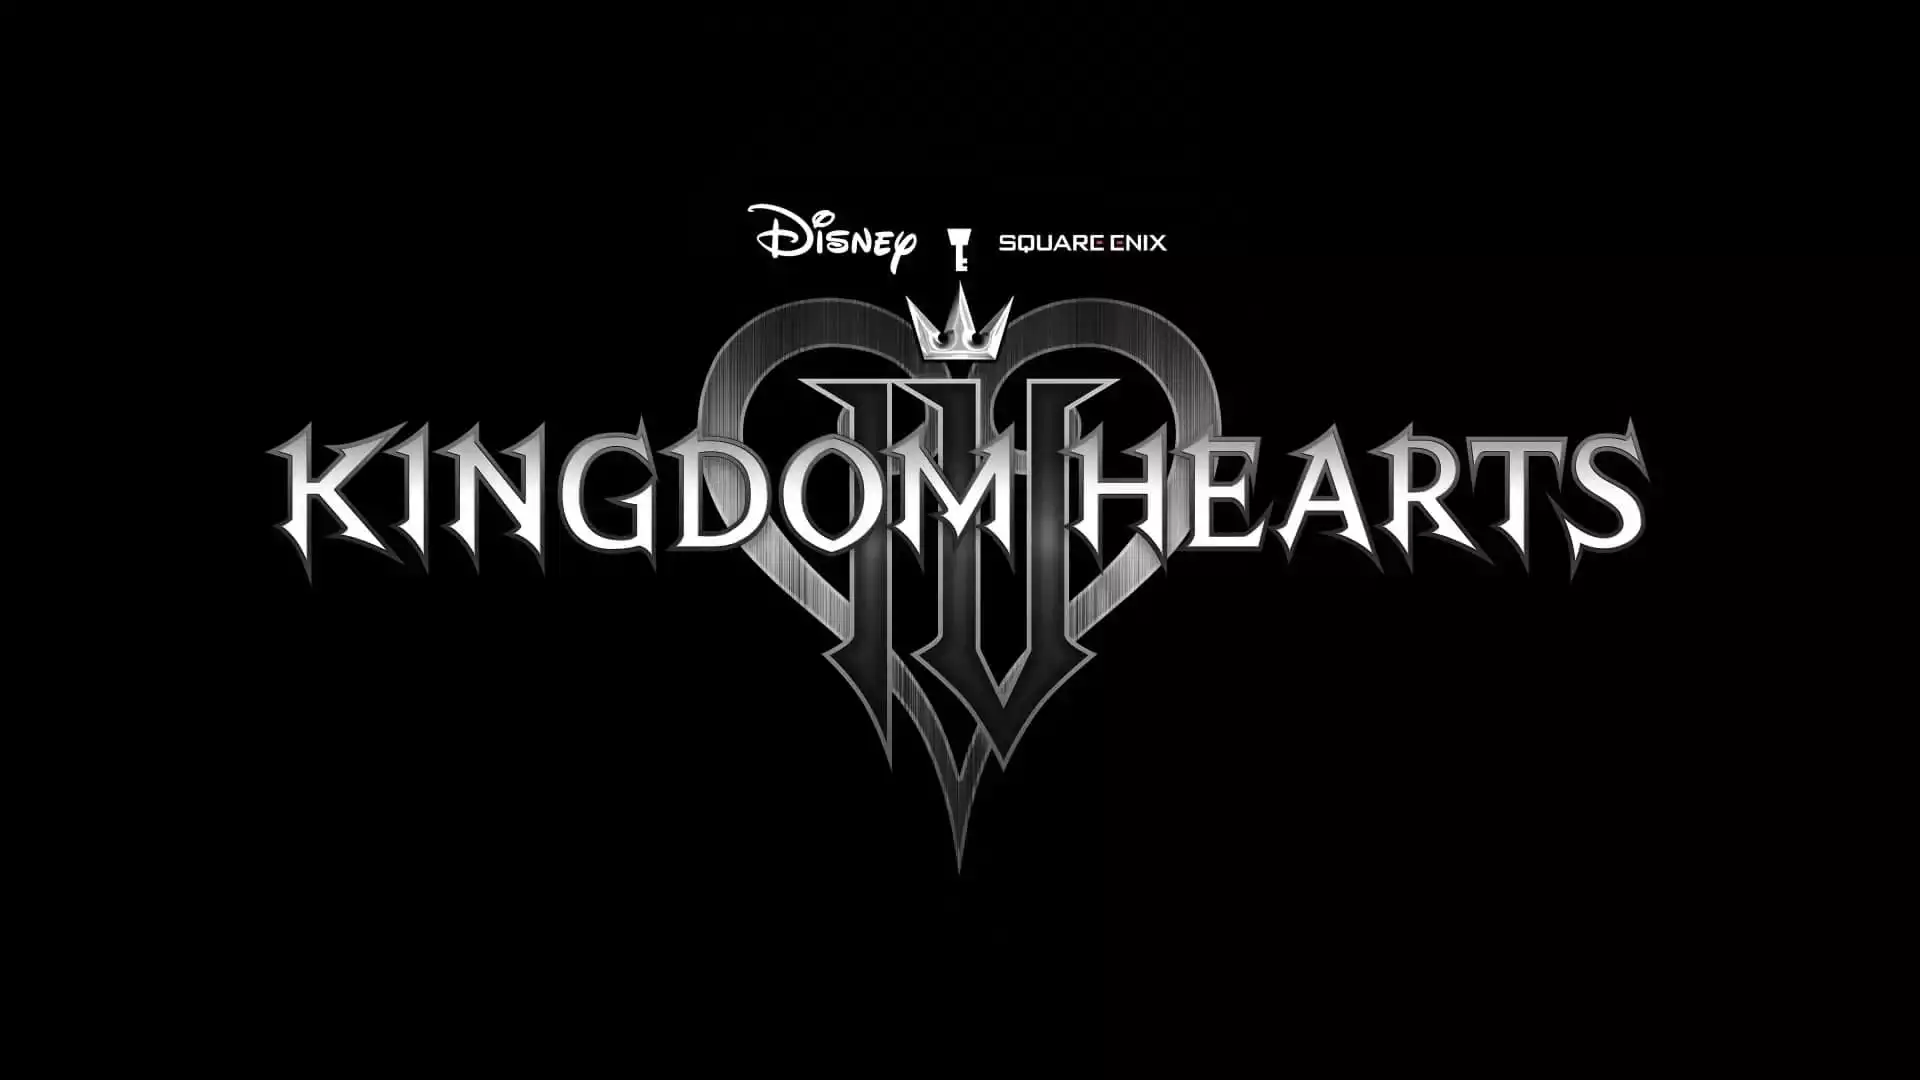 Kingdom Hearts 4: Release Date, Gameplay, Trailers, And More